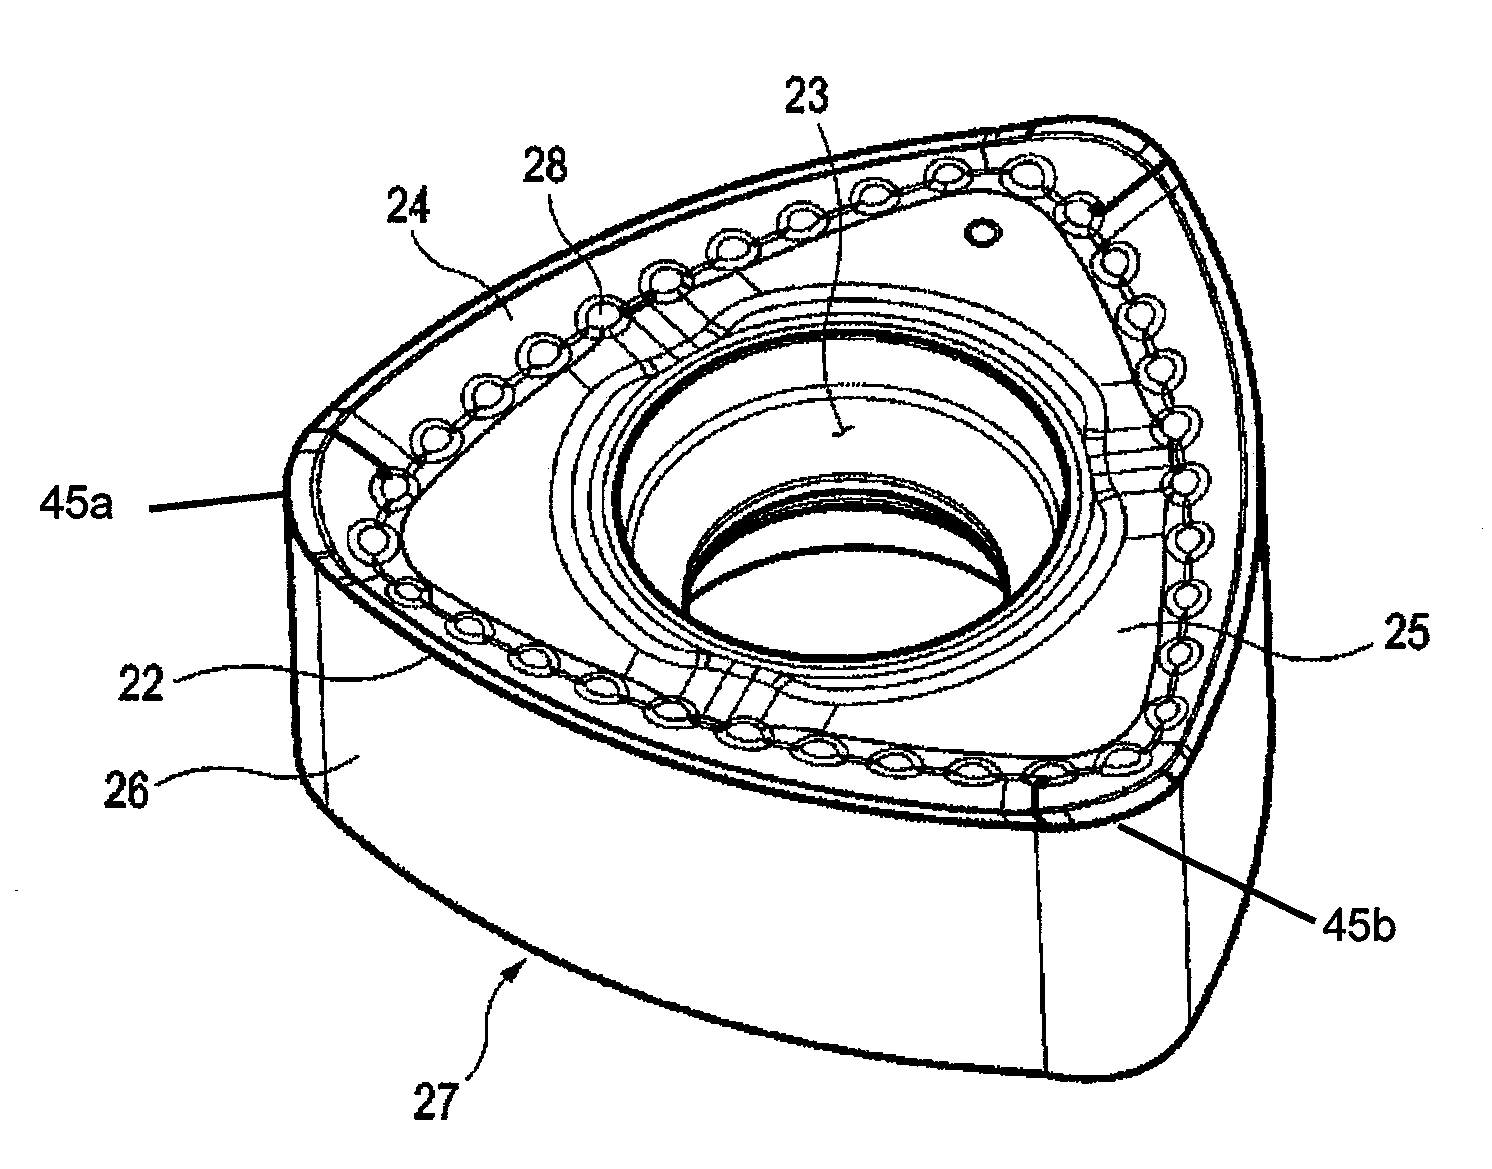 Double-Sided Cutting Insert and Milling Cutter Mounting The Same